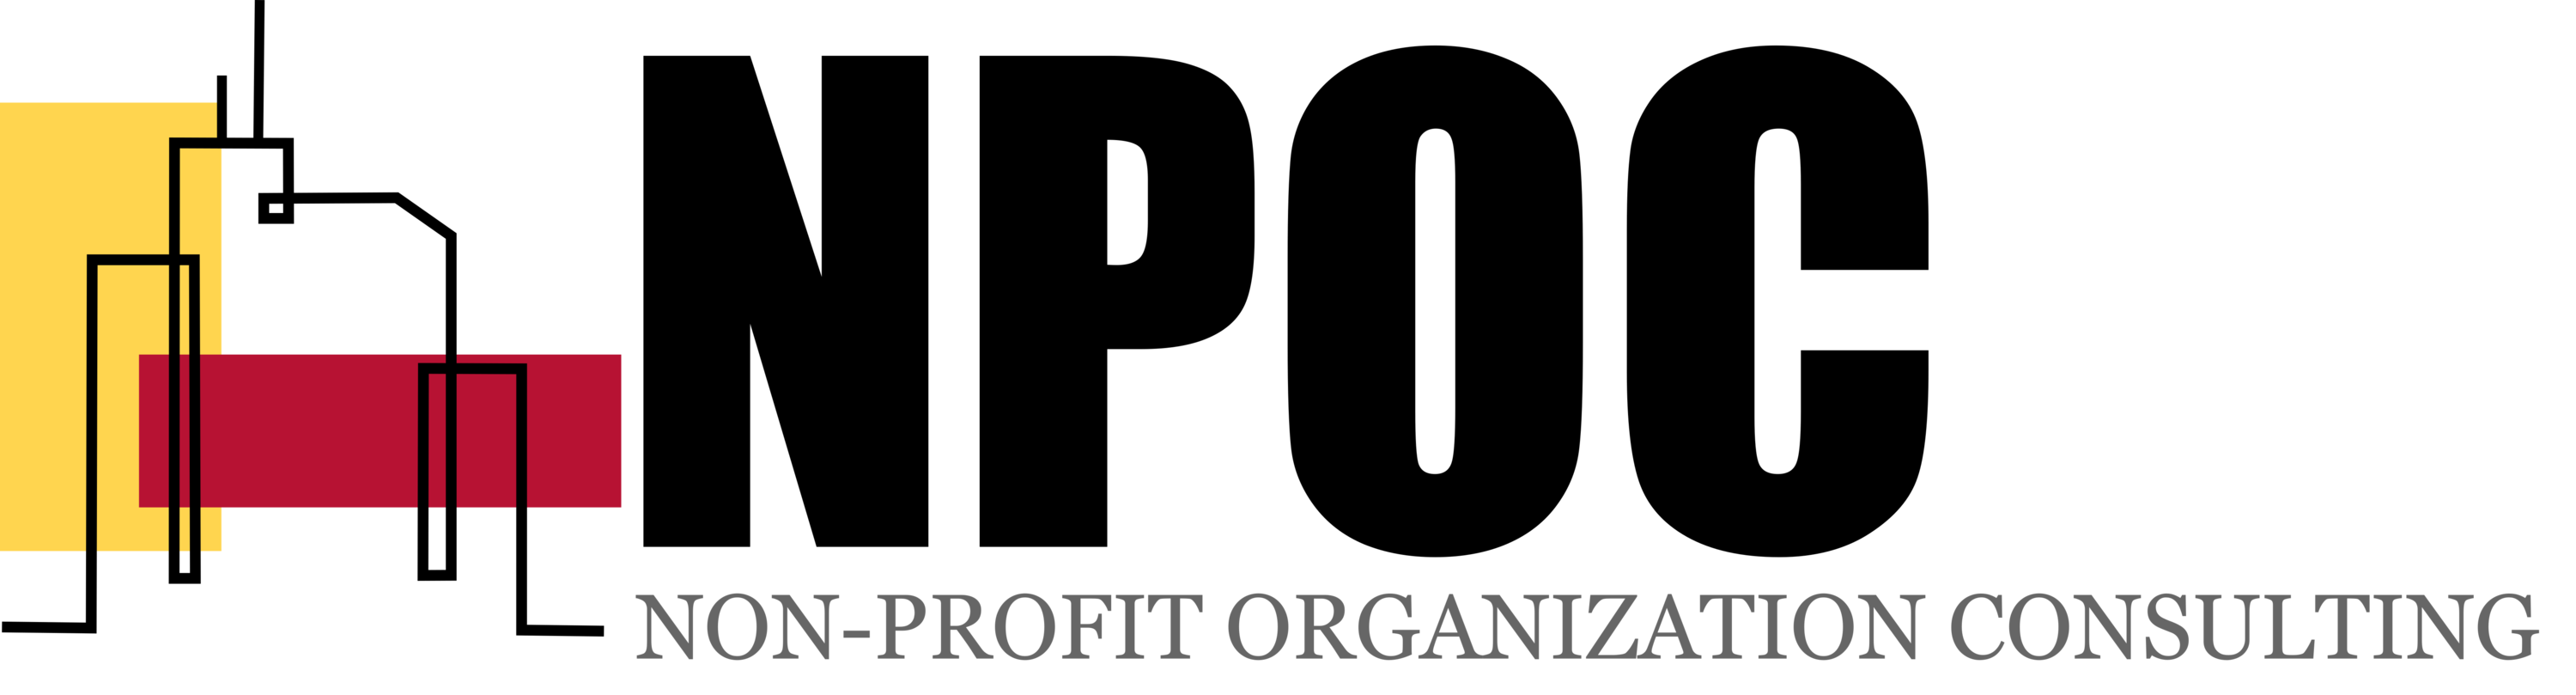 NPOC logo: outline of a skyscraper beside text reading "NPOC: Non-profit organization consulting"